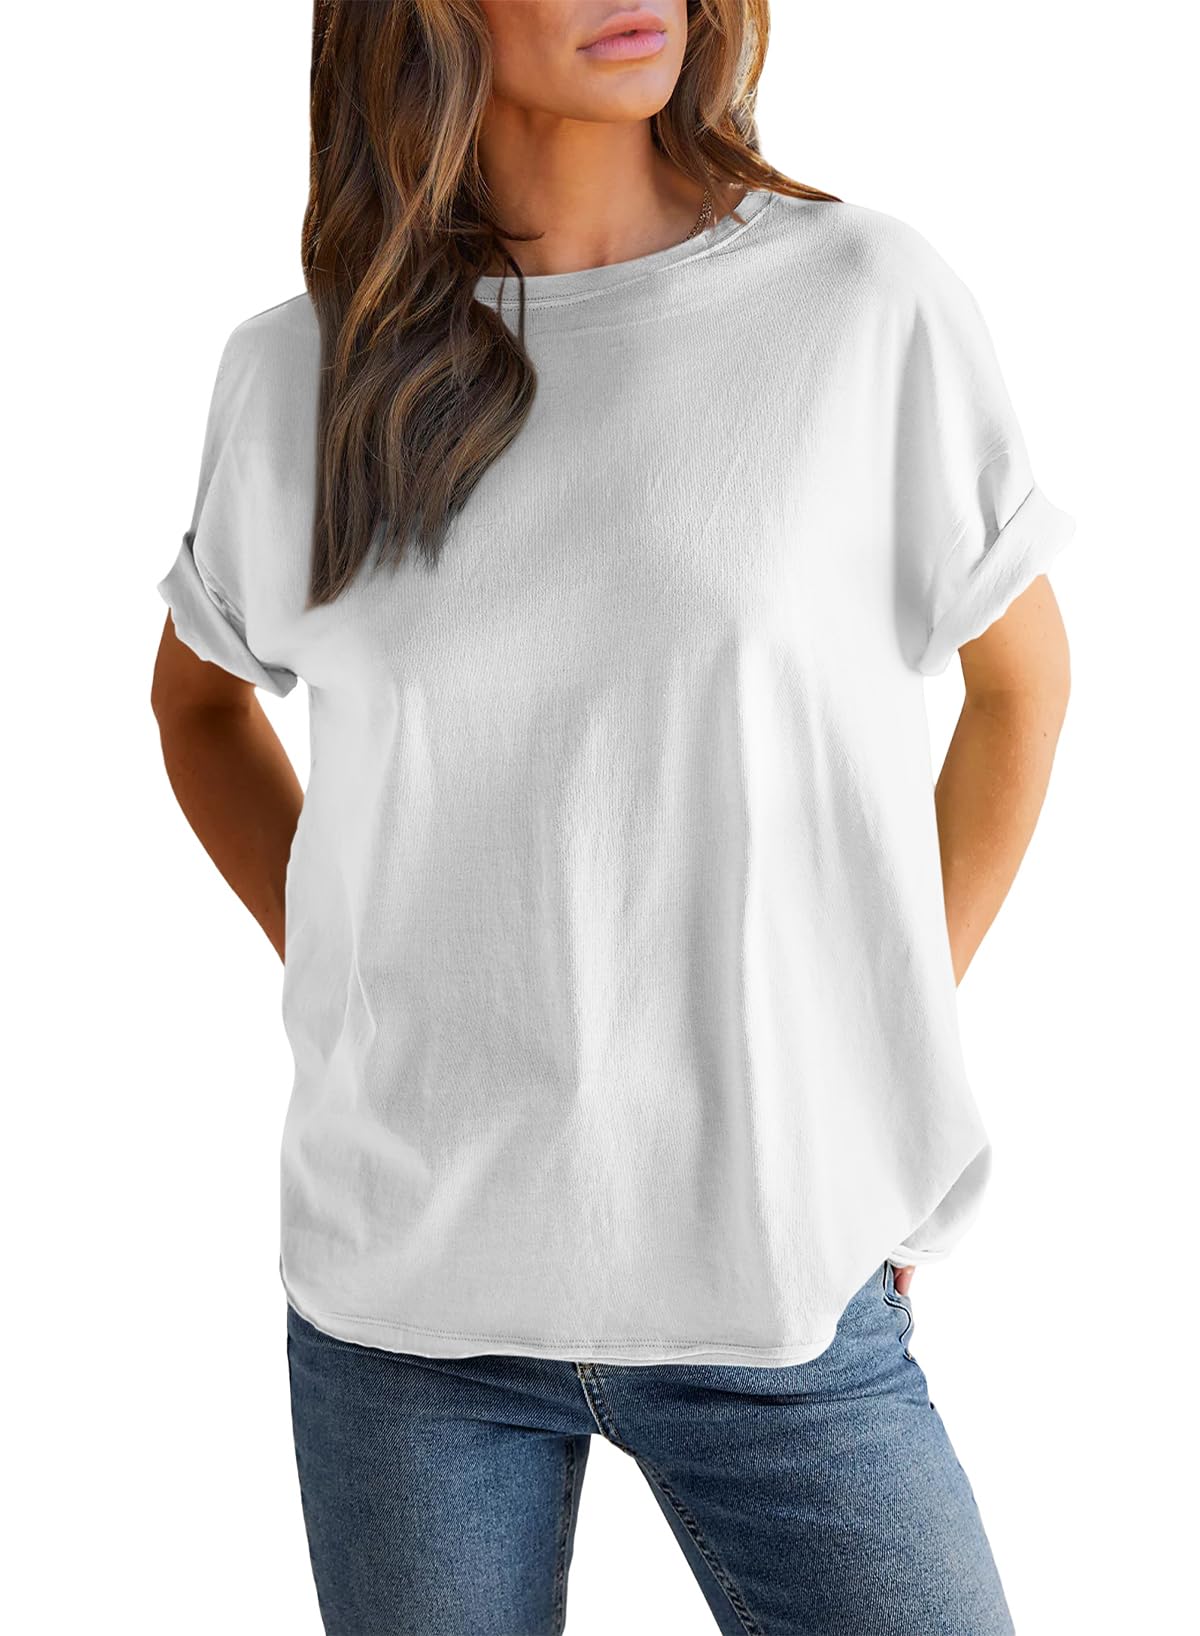 Round neck solid color short sleeve back spliced T-shirt cotton tee